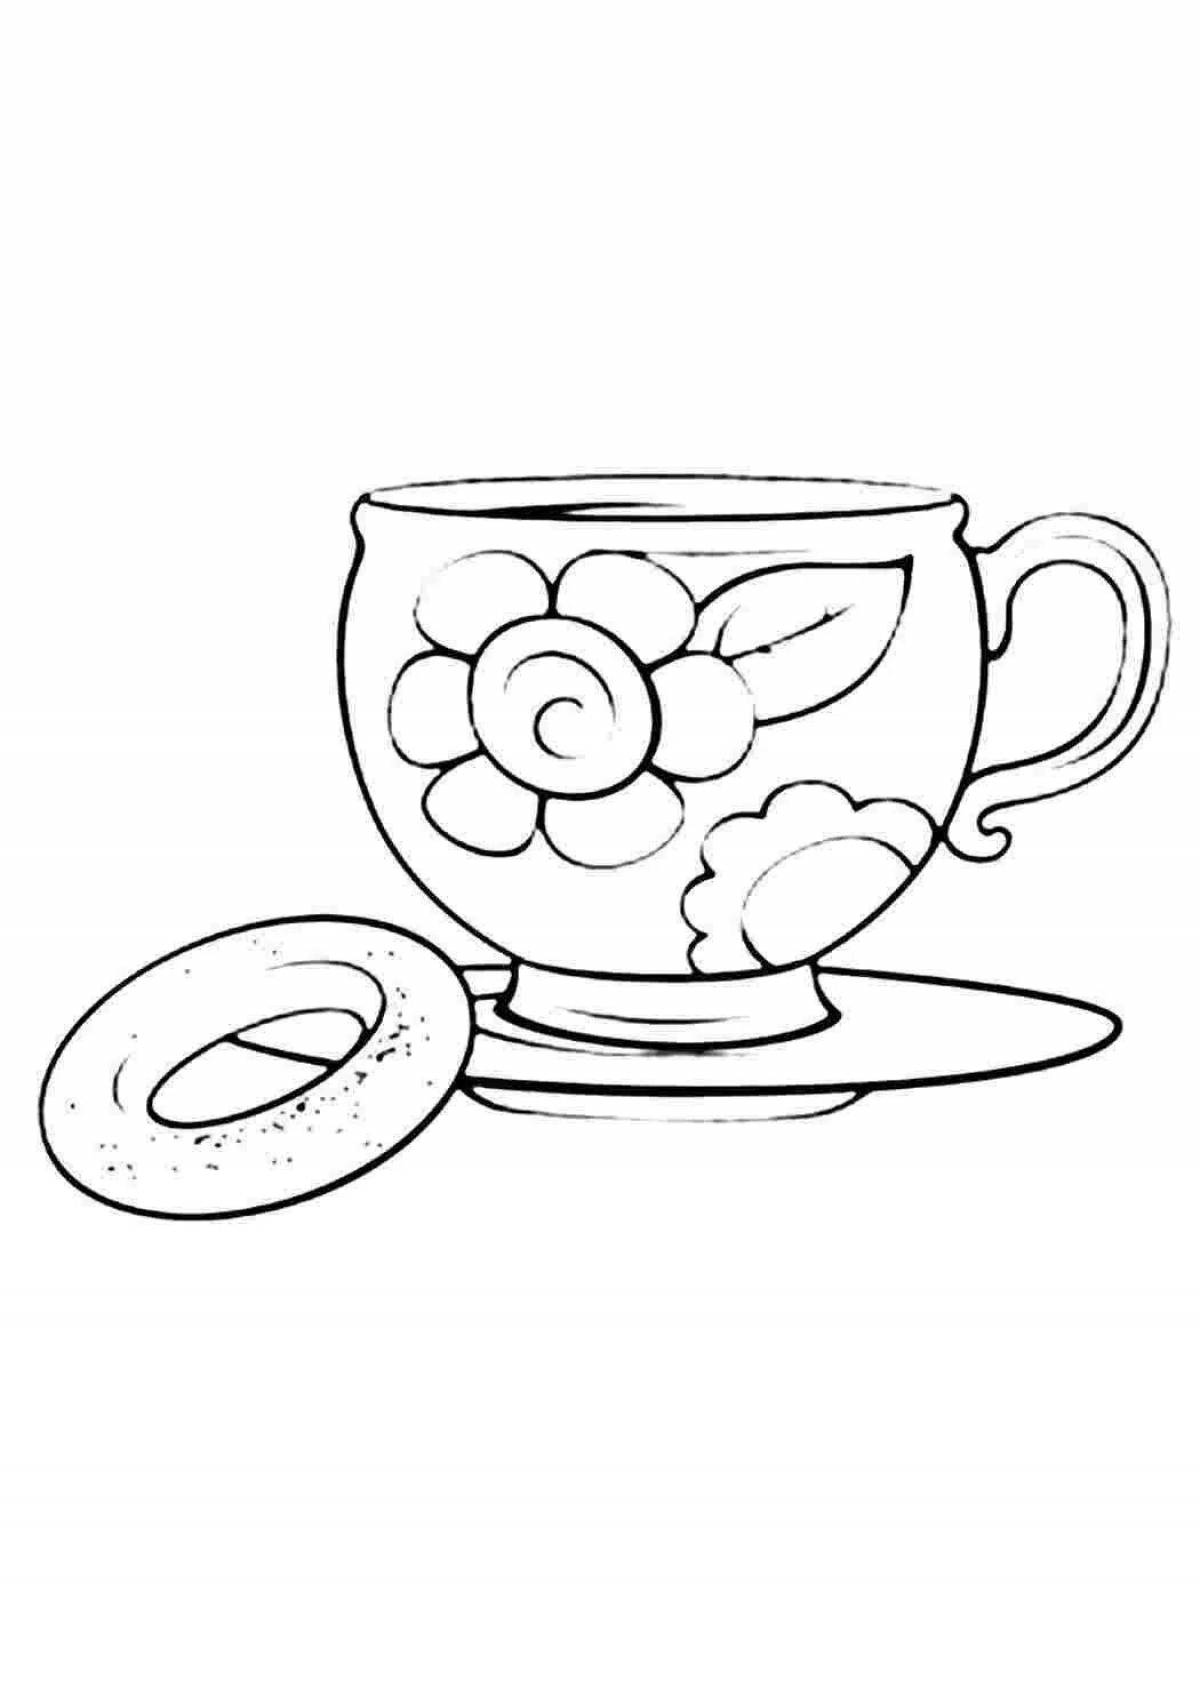 Outstanding cup and saucer coloring book for kids